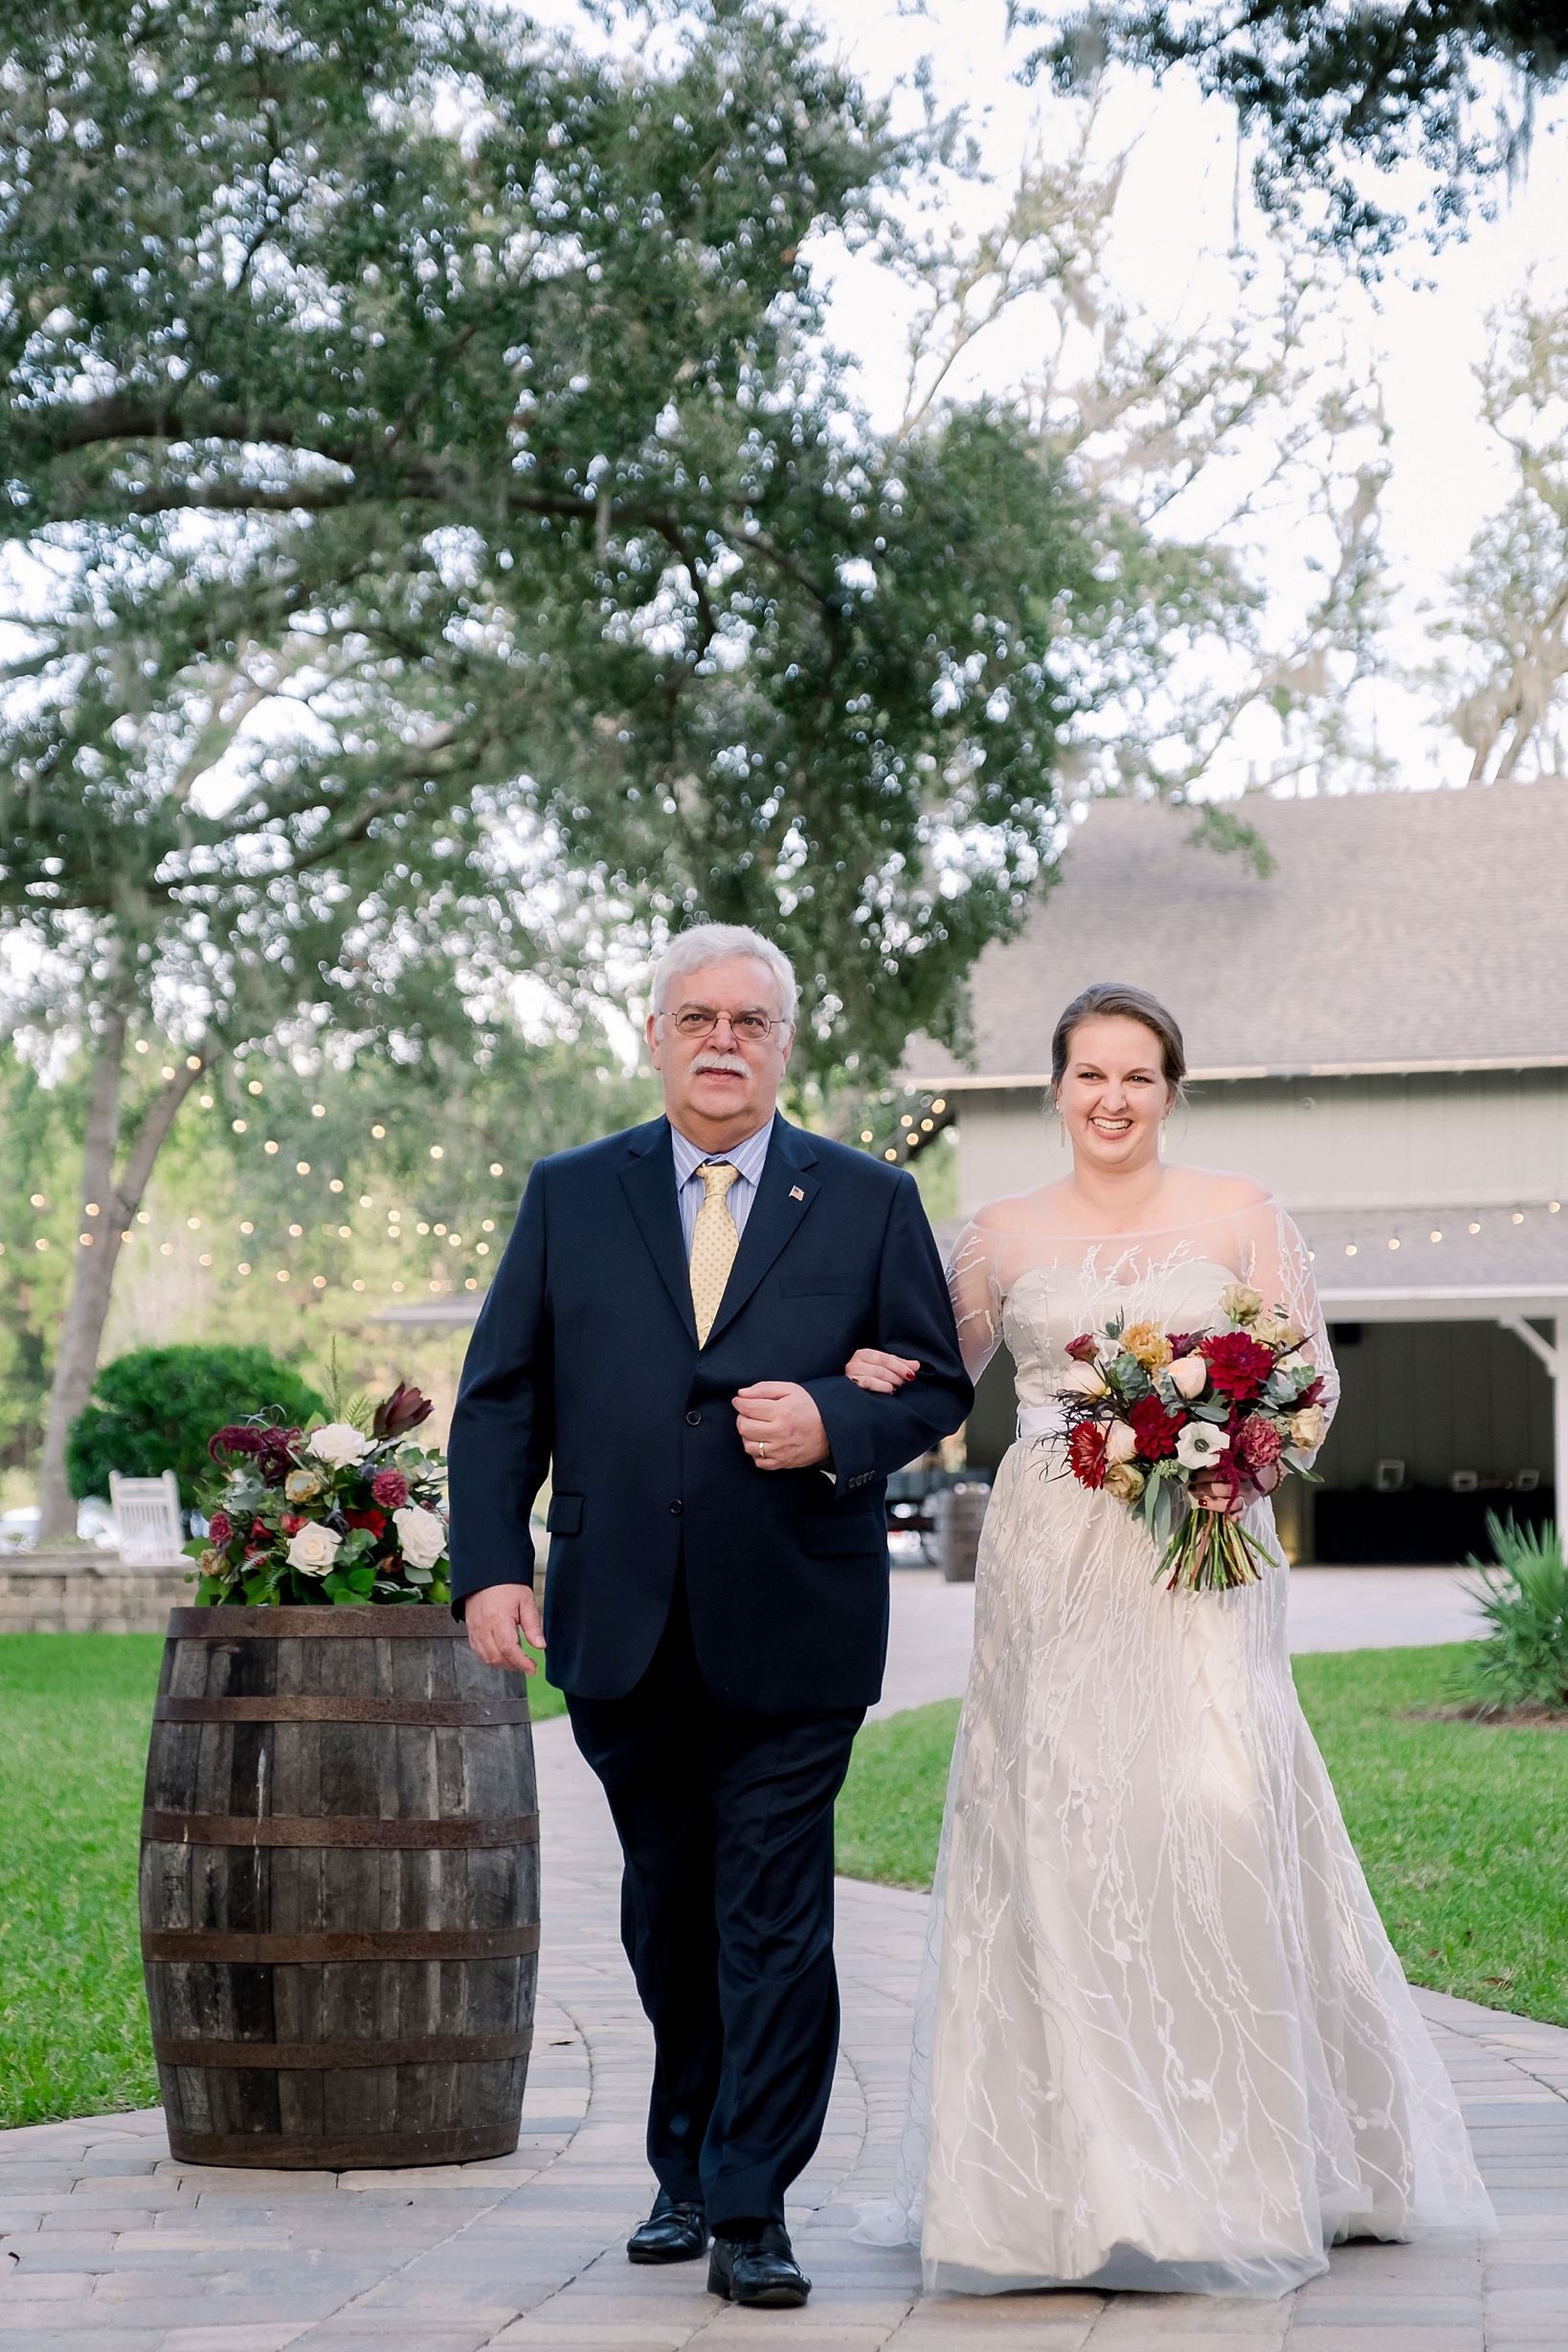 The bride and her father walk down the aisle at Bowing Oaks Plantation